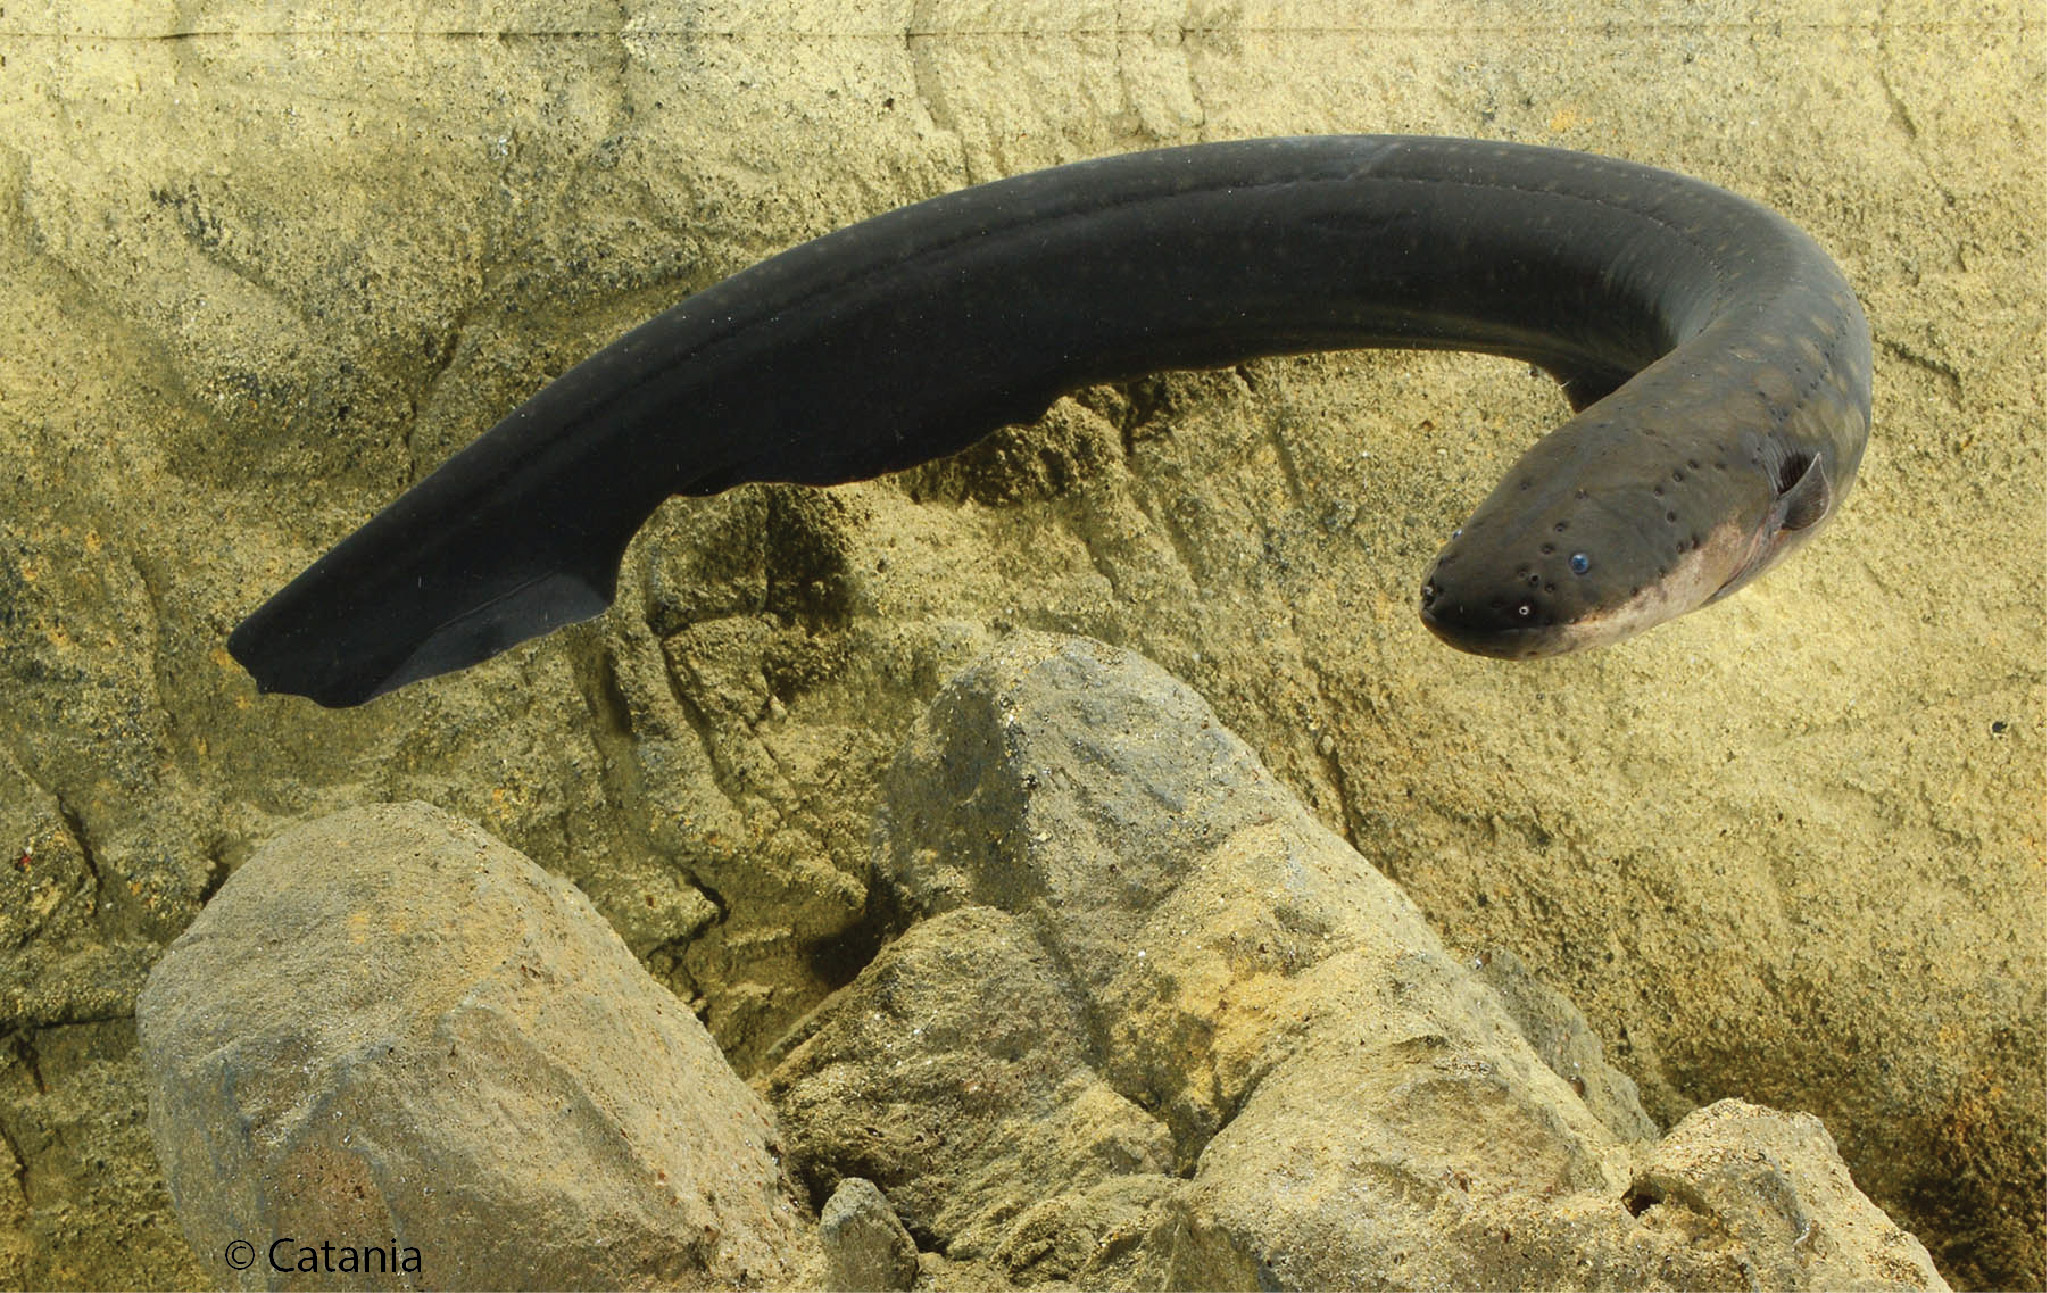 Electric eels use taser-like technique to paralayze their prey - CBS News